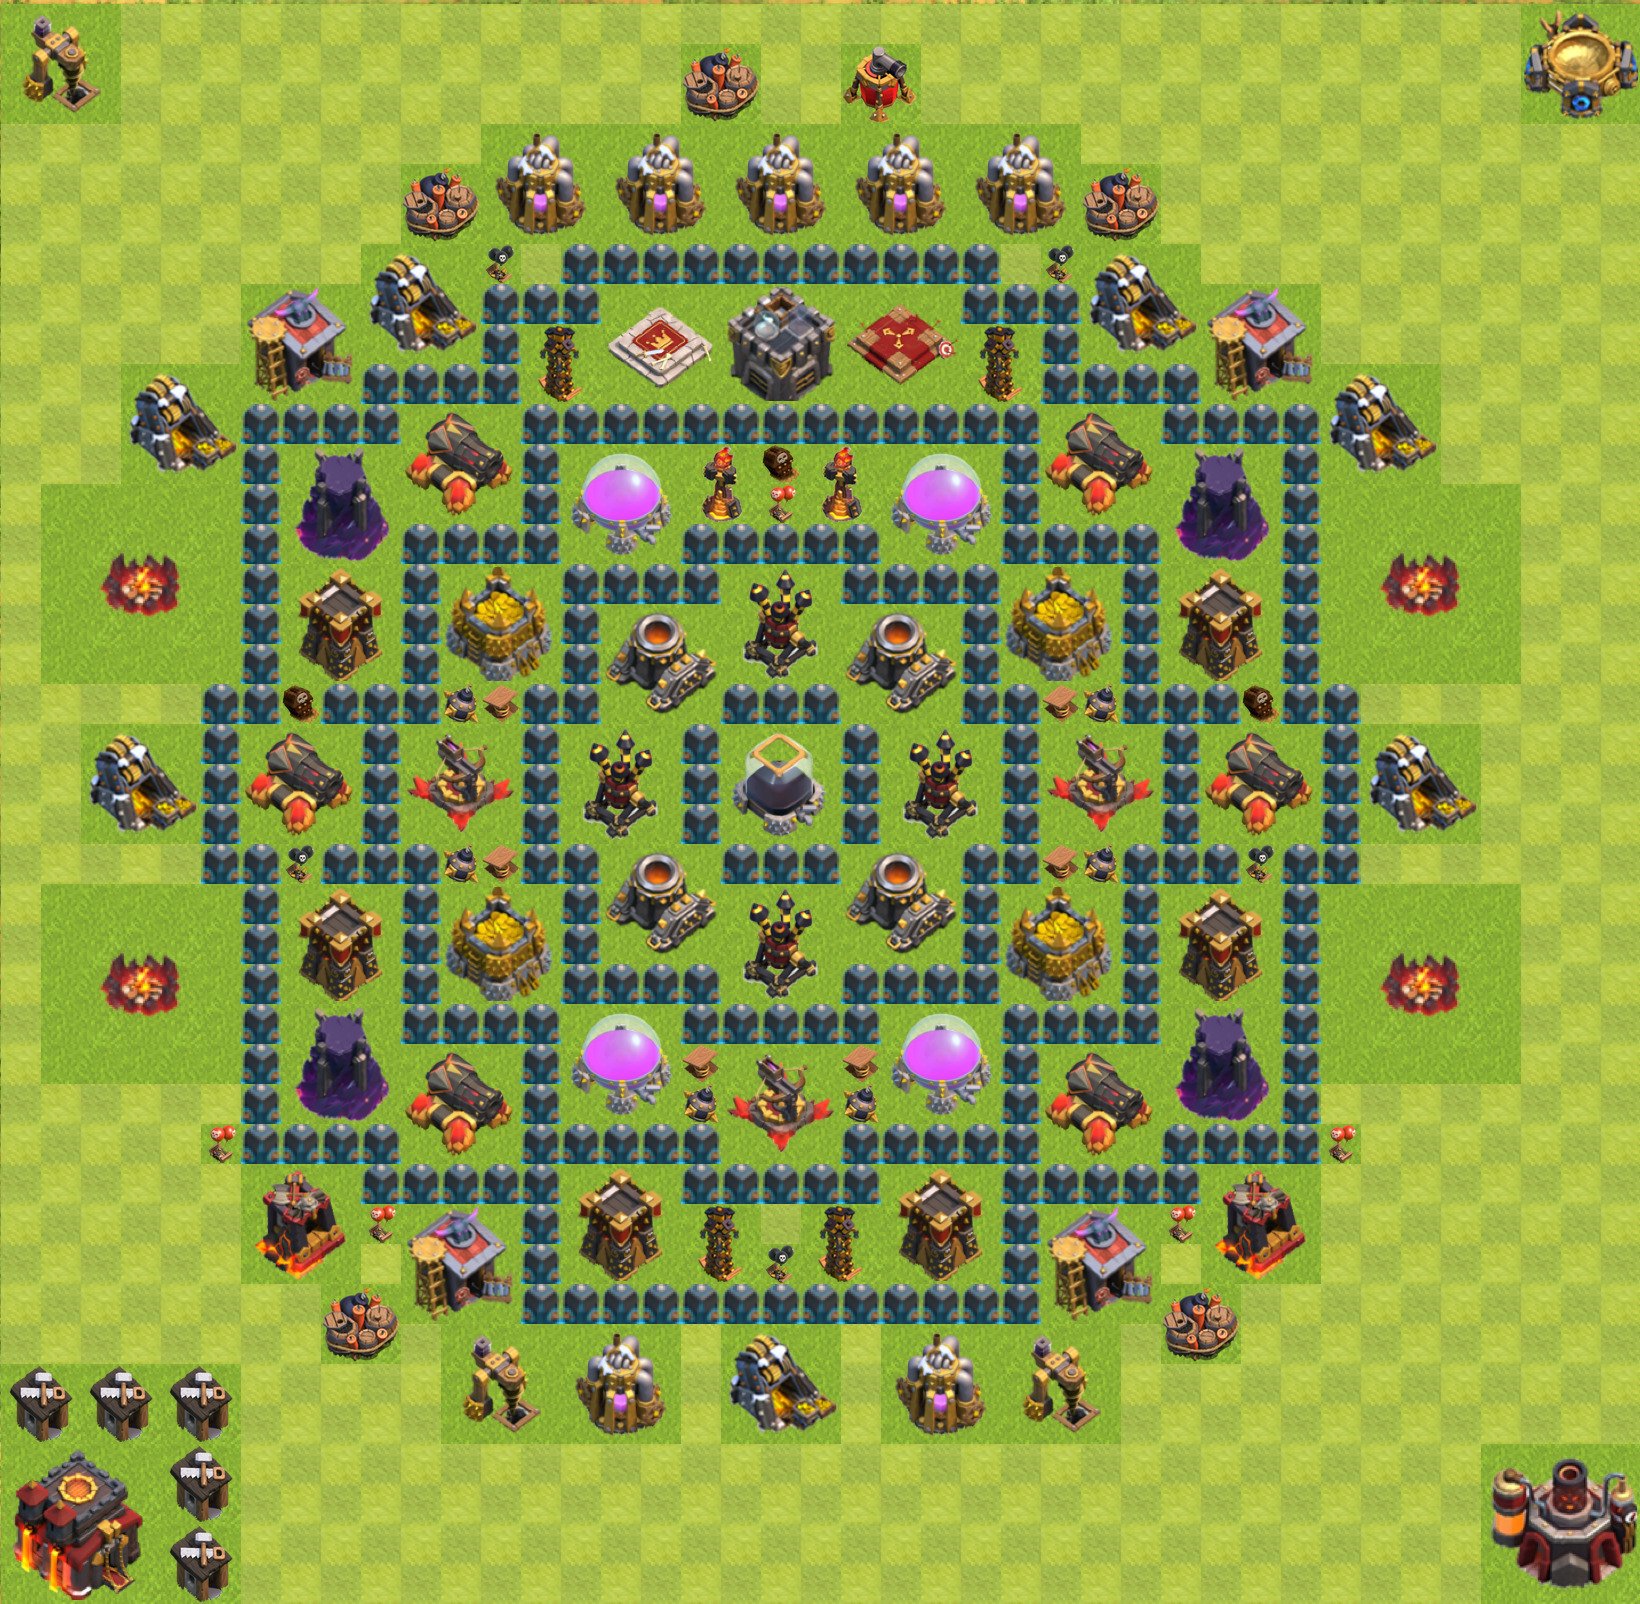 optimal layout clash of clans